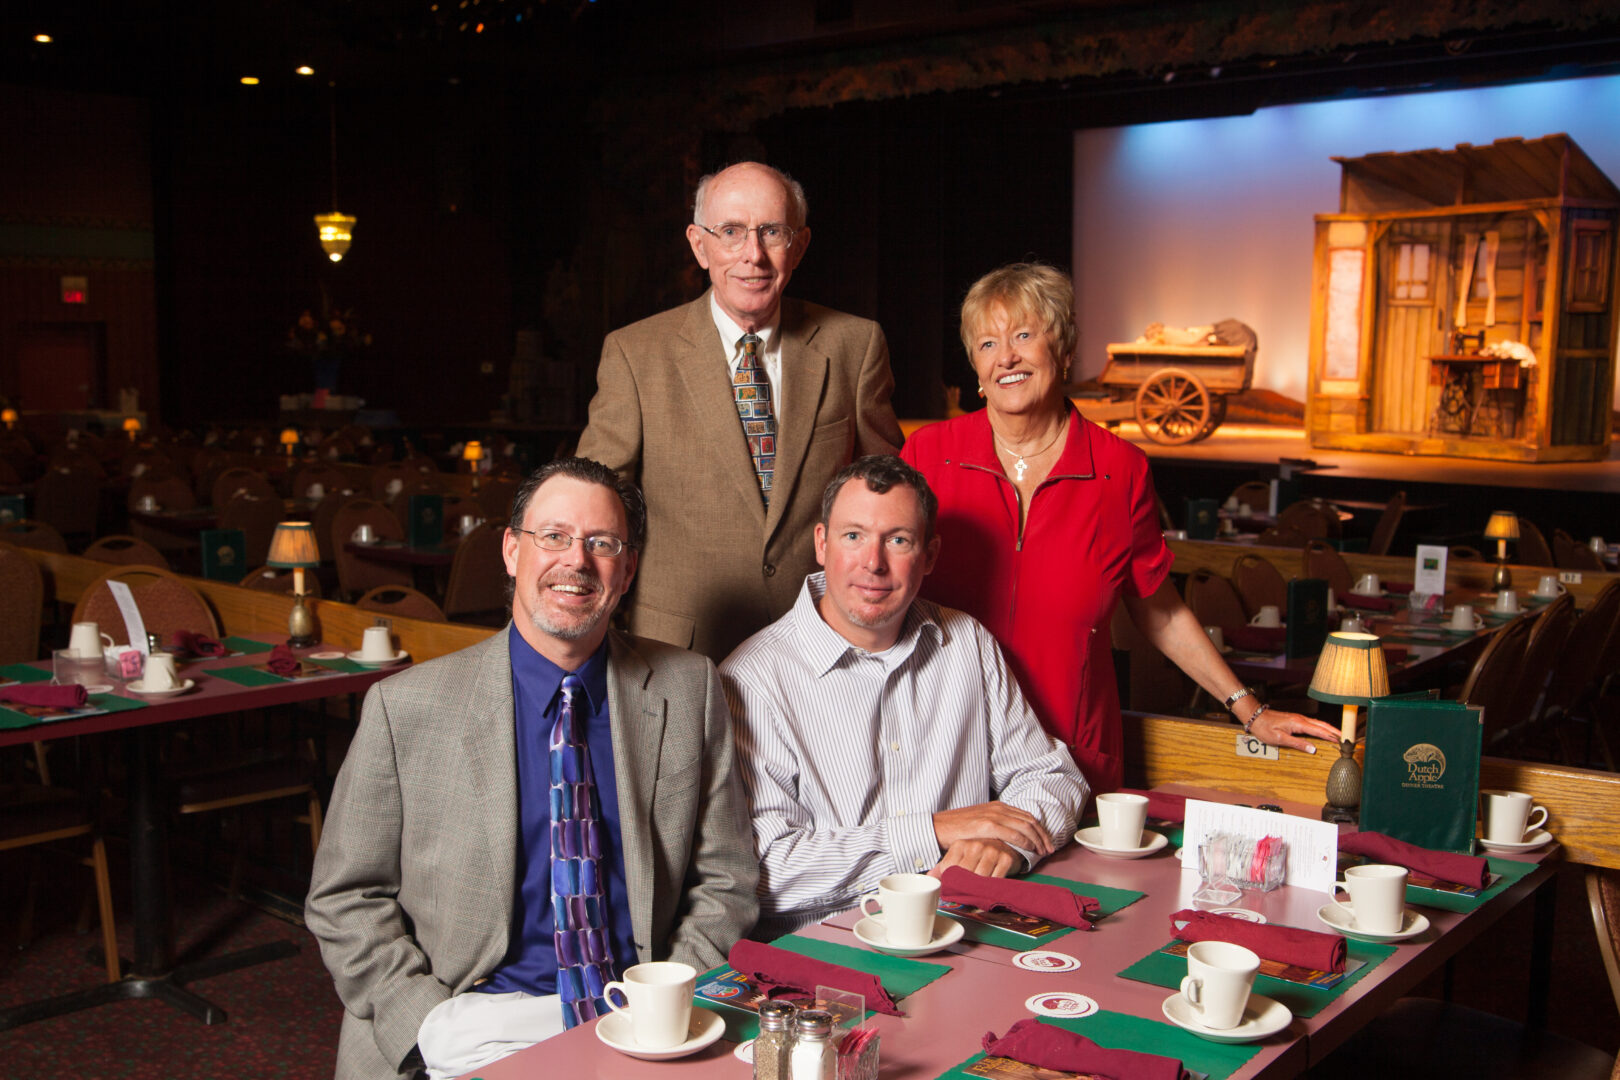 Standing (left to right) is Thomas and Deborah Prather, founders of Dutch Apple Dinner Theatre. Seated (left to right) is Will and David Prather, owners of Dutch Apple Dinner Theatre.